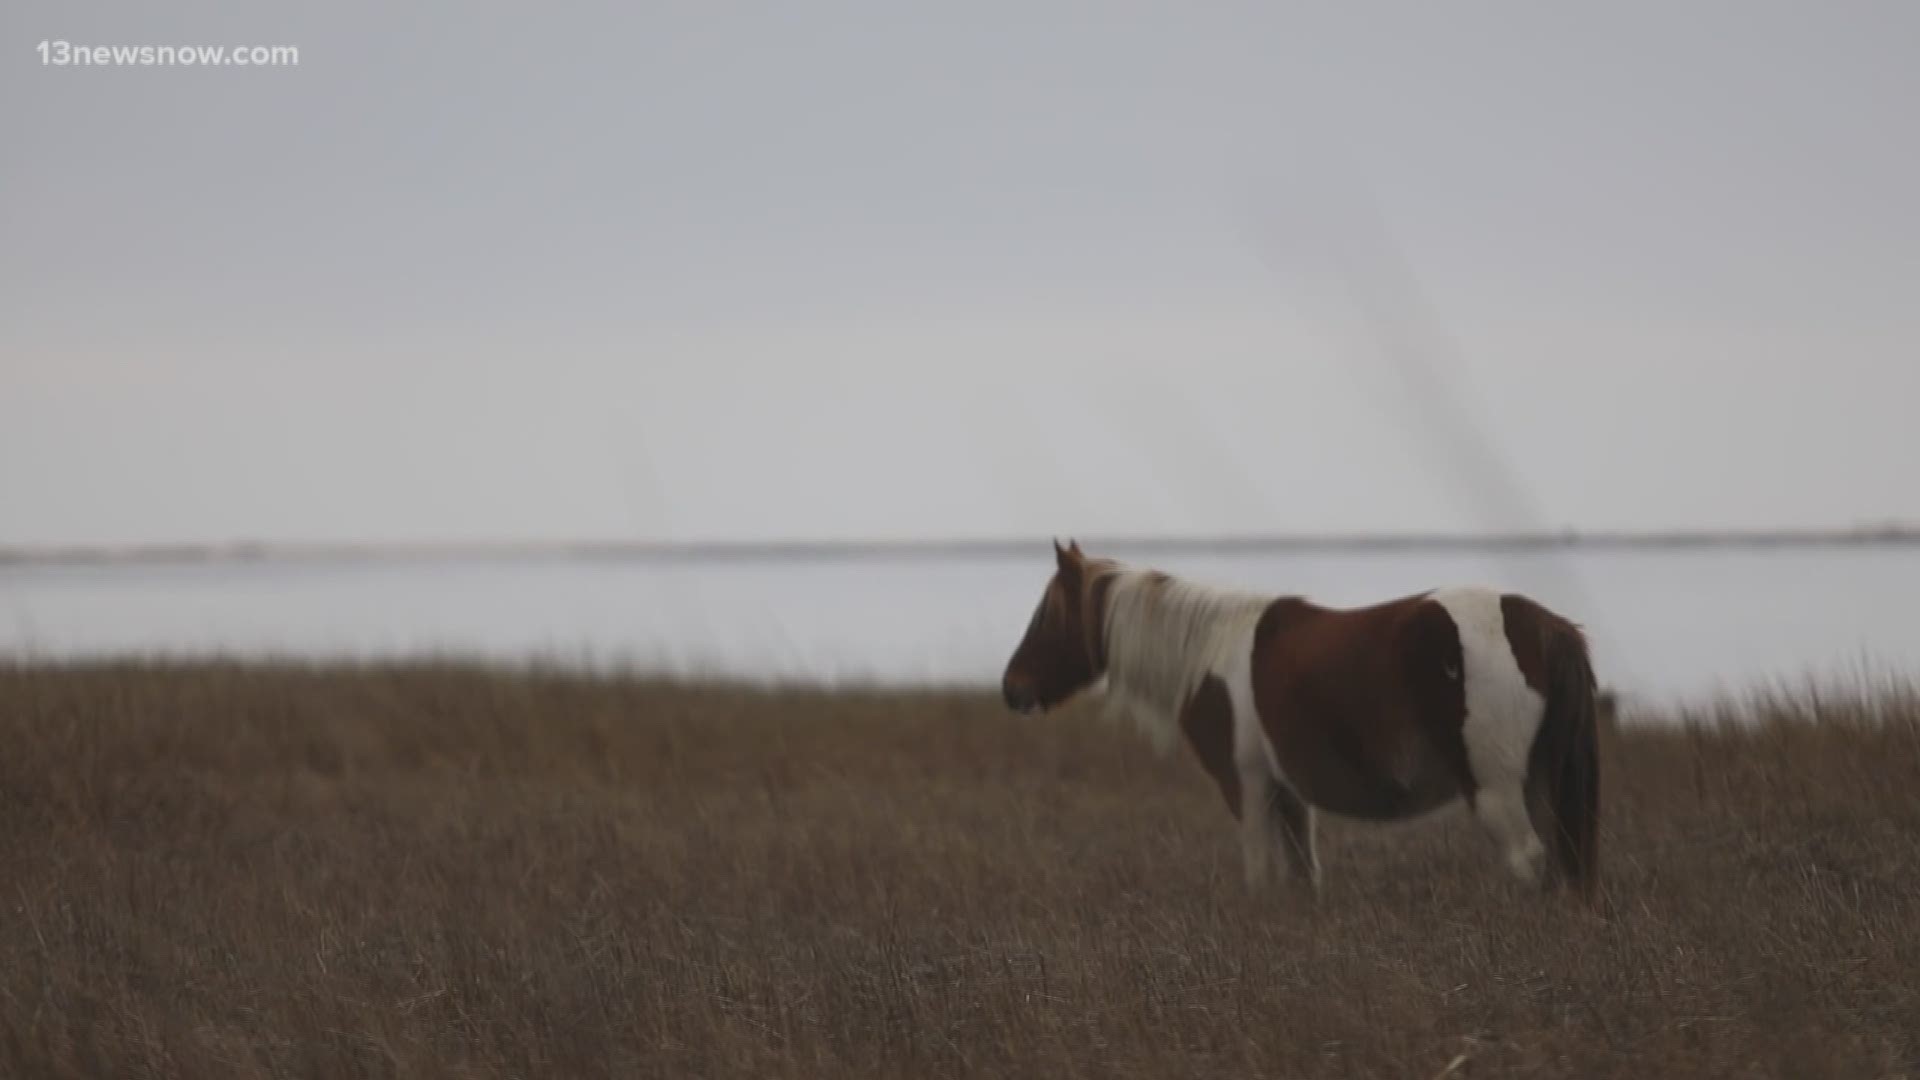 Since October, authorities have euthanized seven wild ponies on a Virginia island that were diagnosed with a fungus-like disease known as 'swamp cancer.'